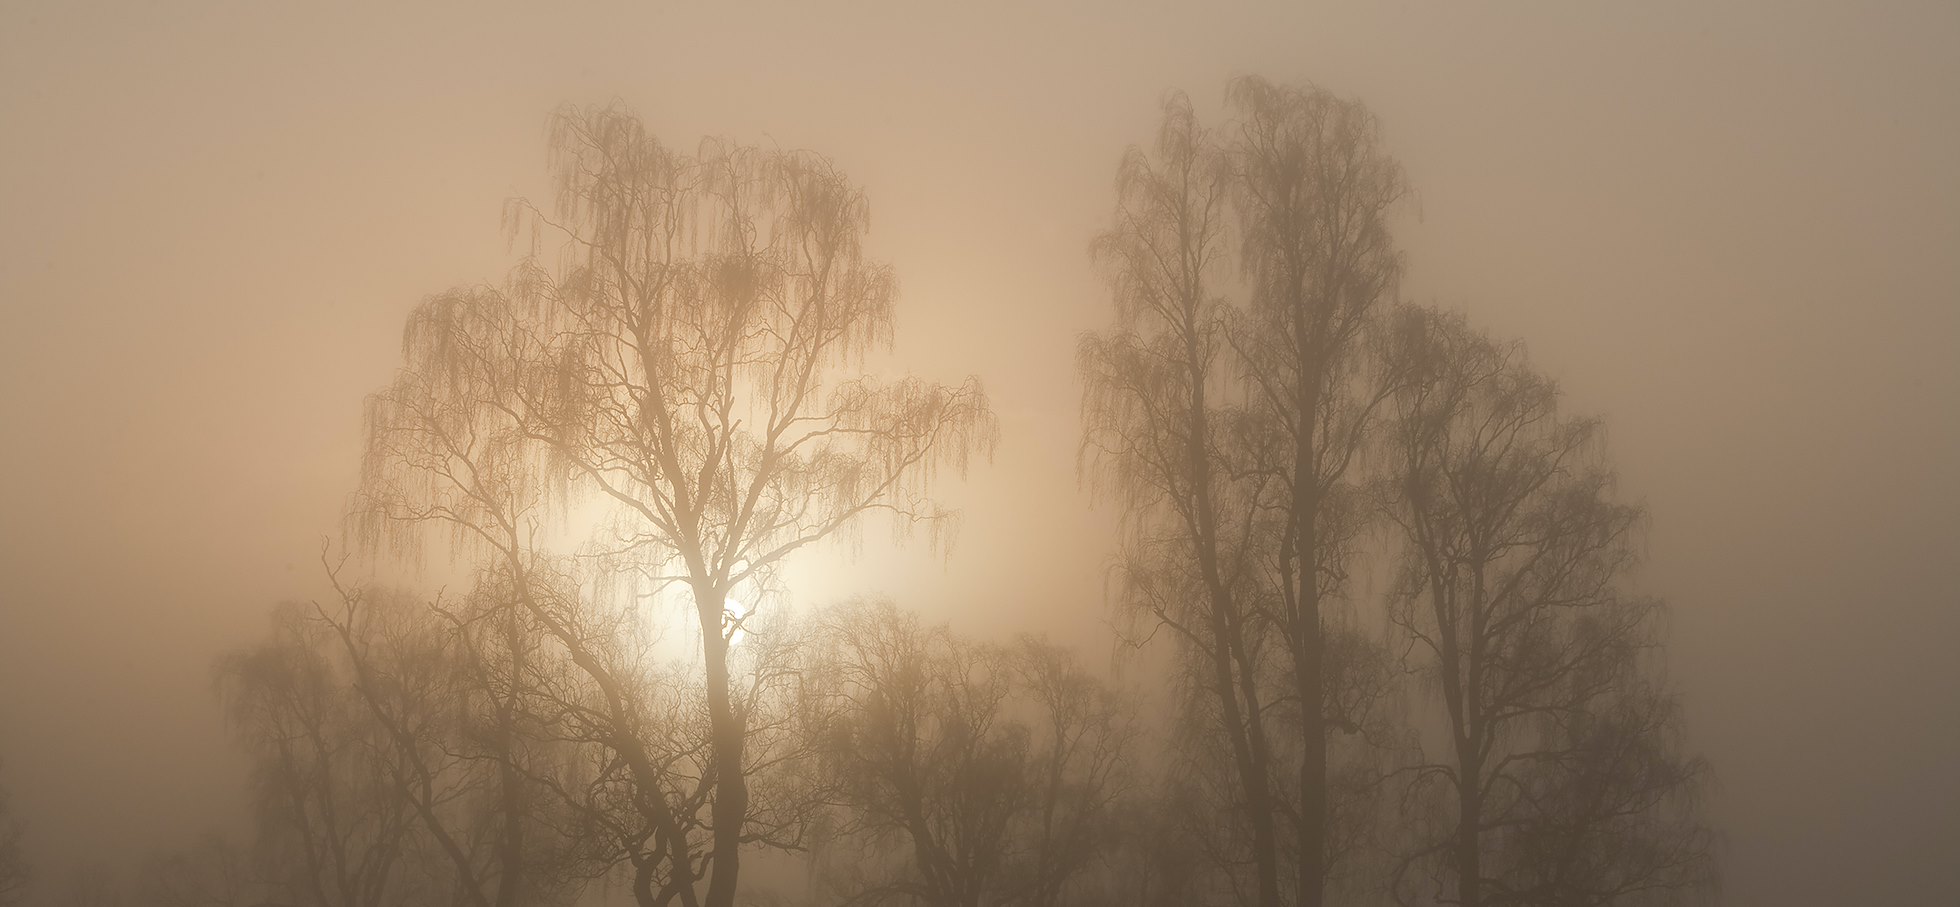 Silver birches silhouetted at dawn, Loch Insh, Cairngorms National Park,  Scotland.